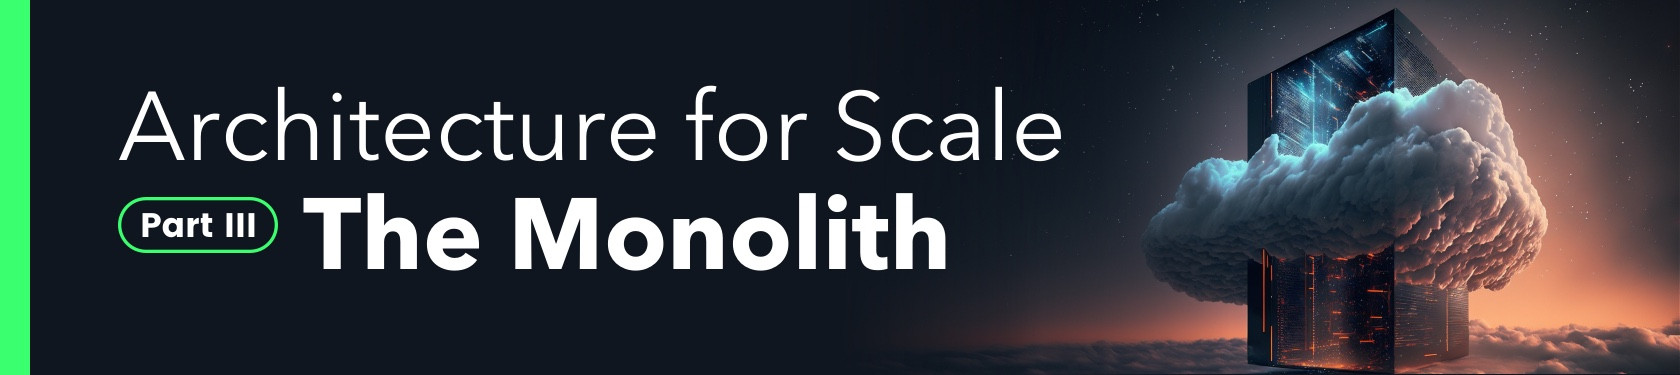 Architecture for Scale Part III: The Monolith